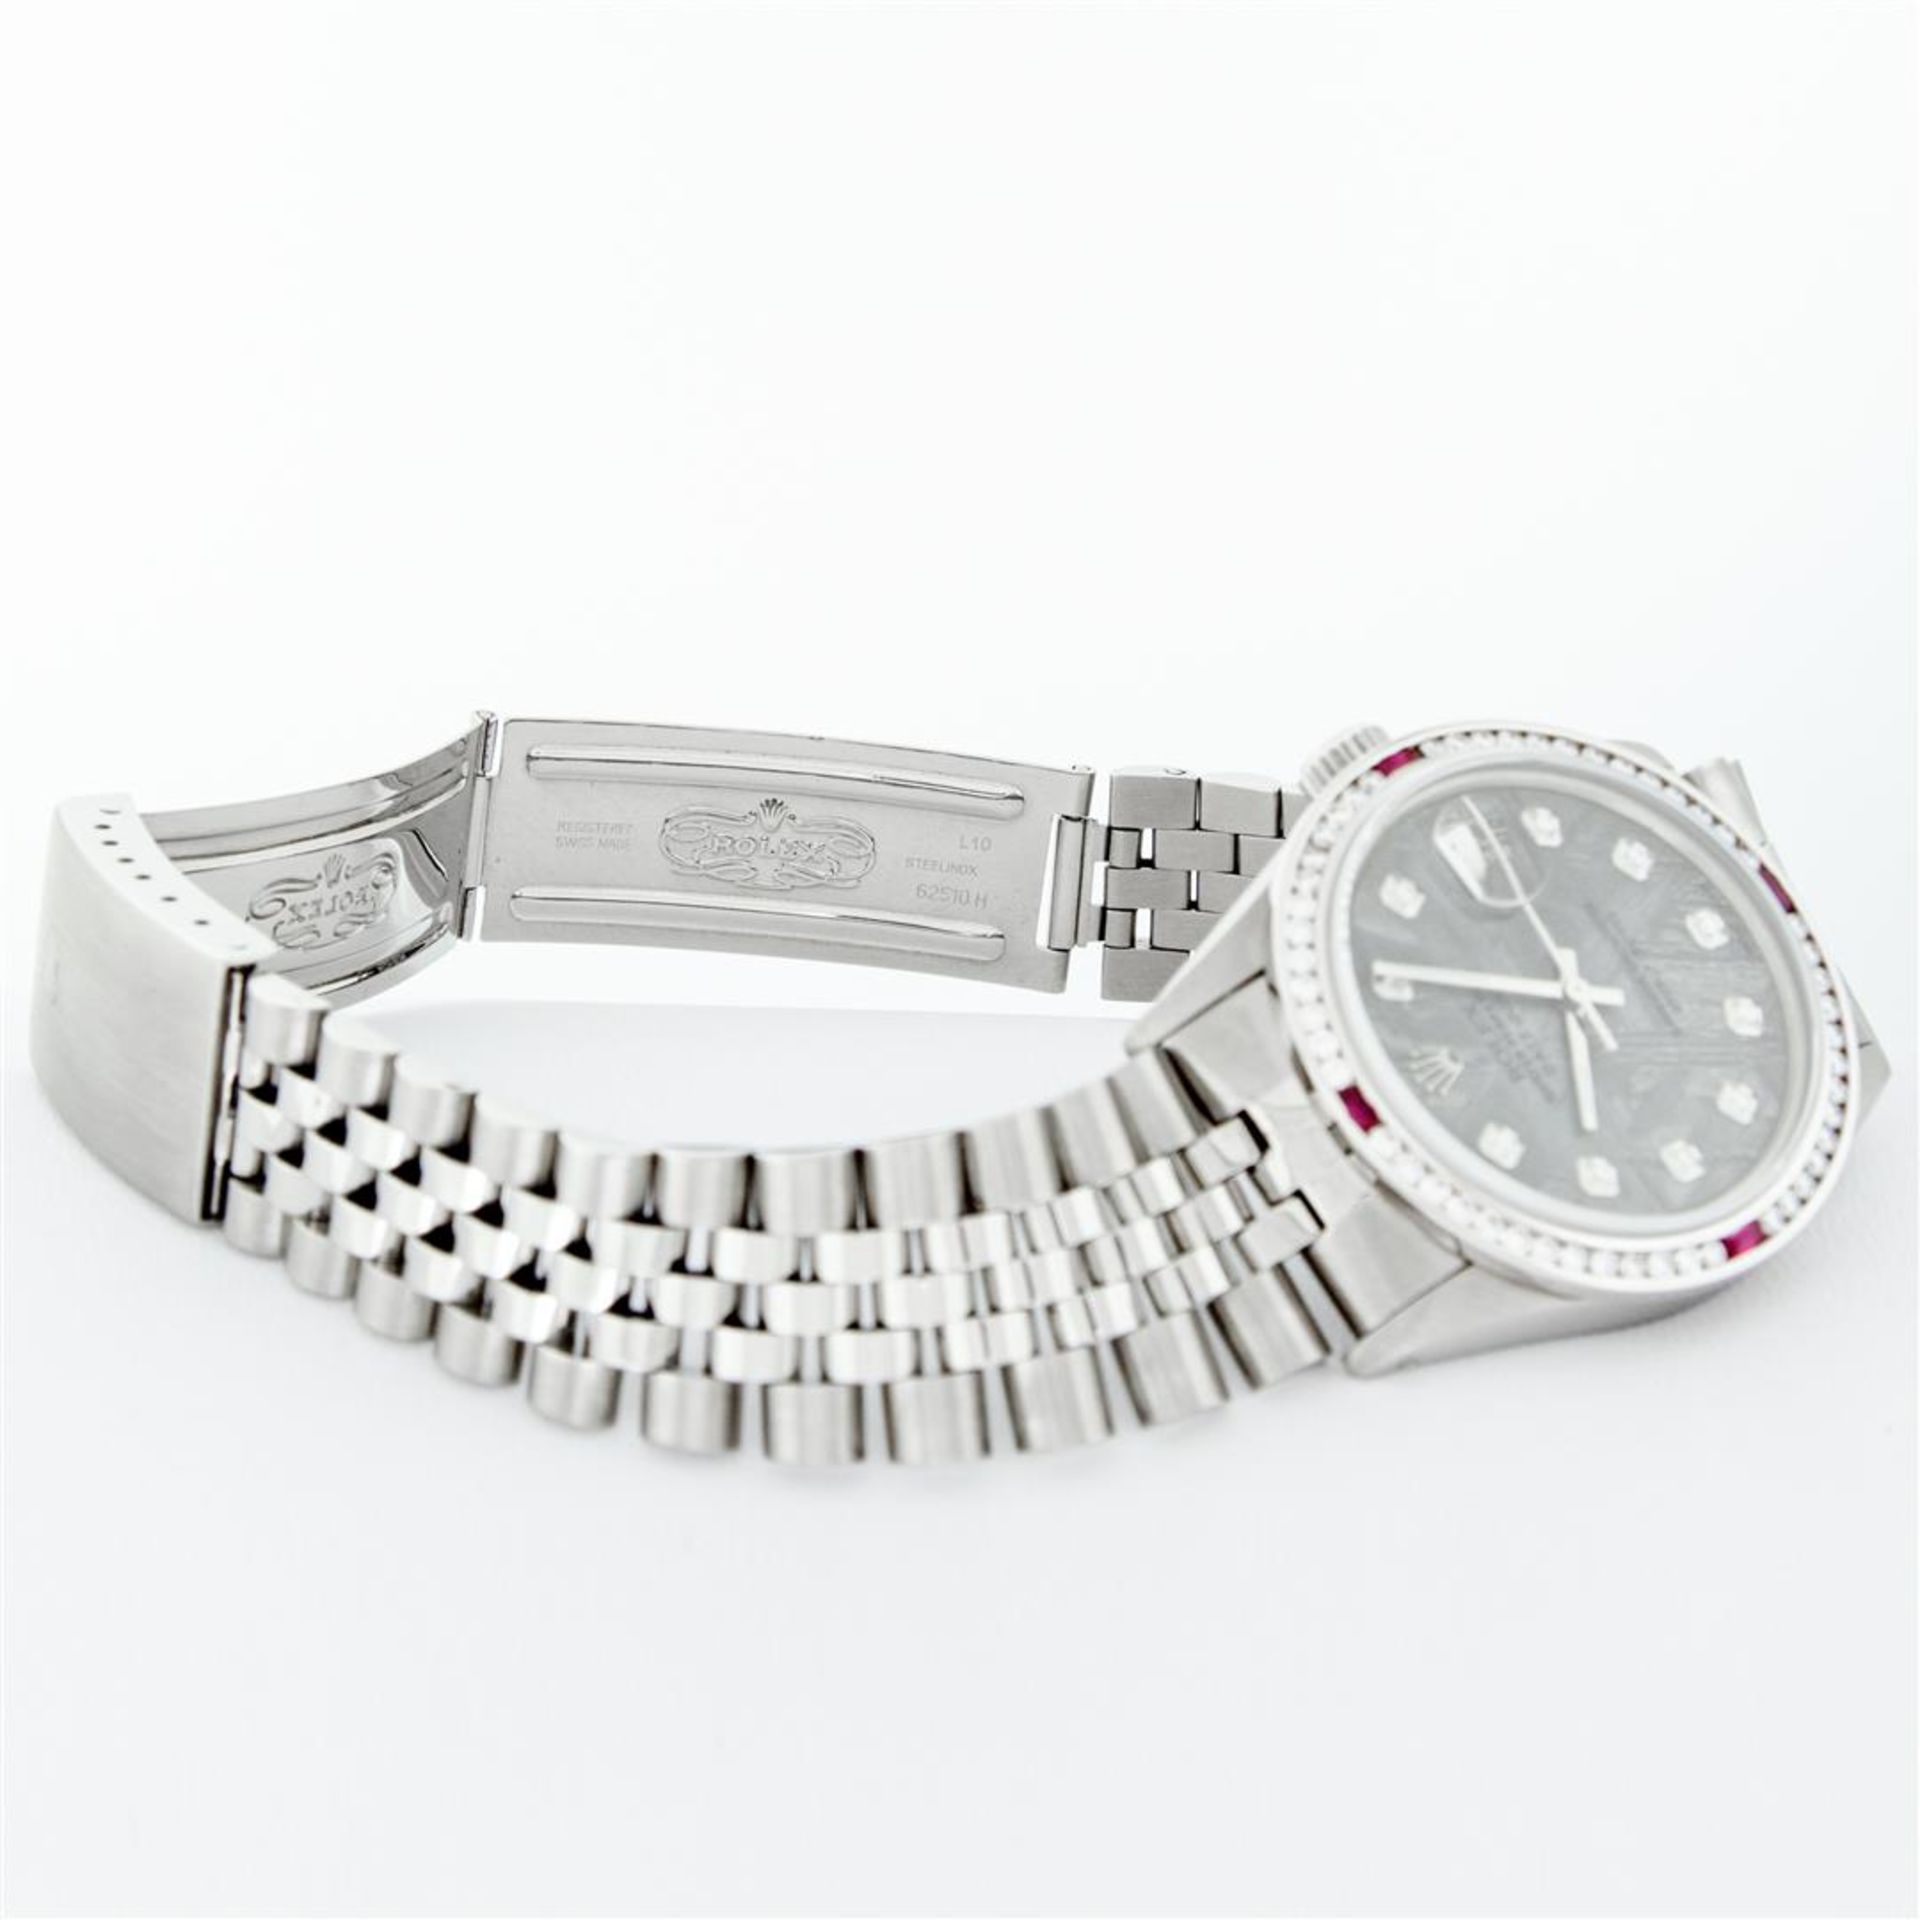 Rolex Mens SS Meteorite Diamond & Ruby Channel Set Oyster Perpetual Datejust Wri - Image 9 of 9